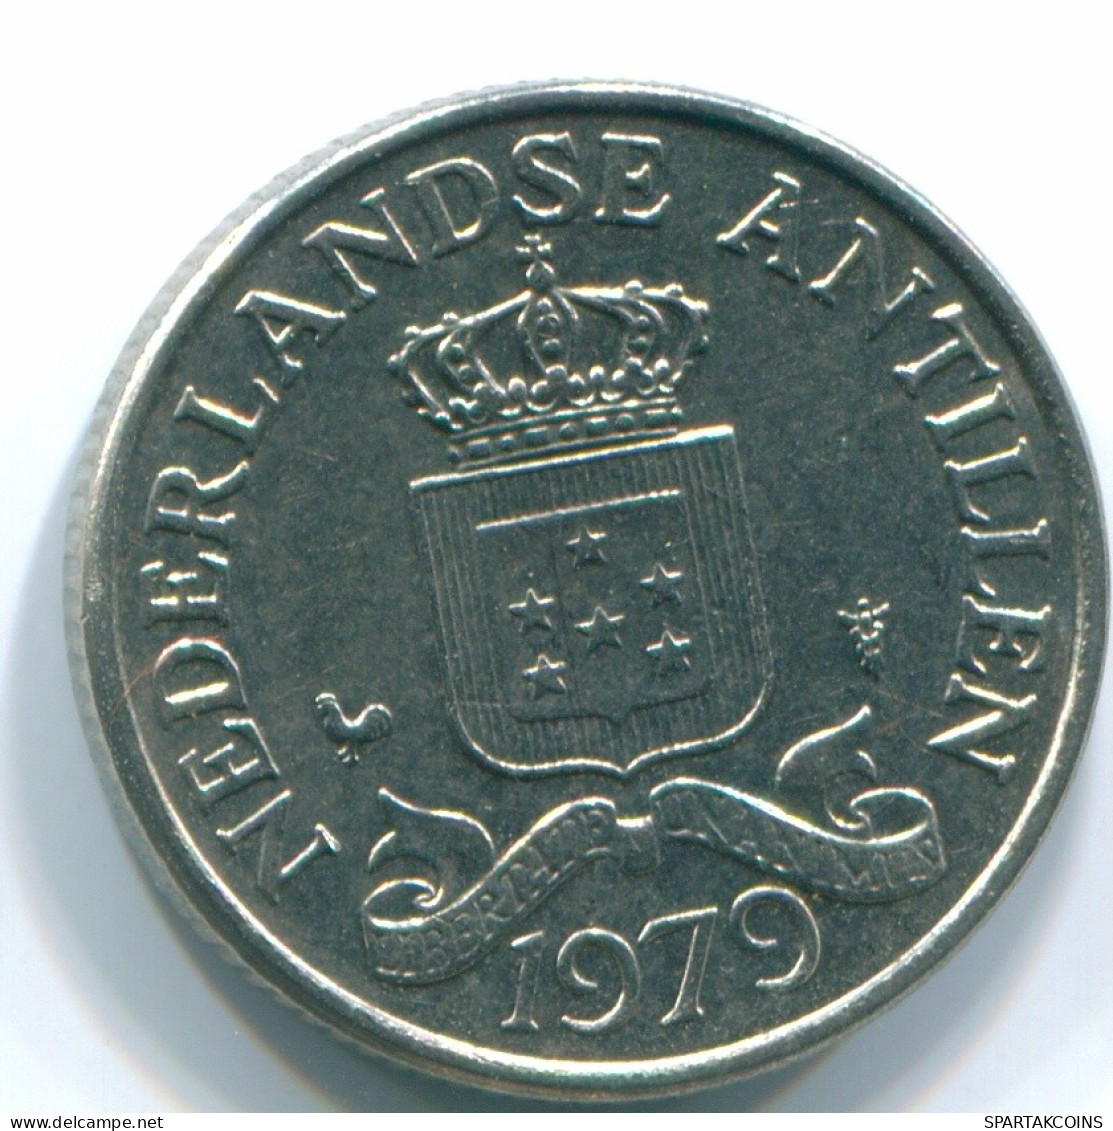 25 CENTS 1979 NETHERLANDS ANTILLES Nickel Colonial Coin #S11646.U.A - Netherlands Antilles